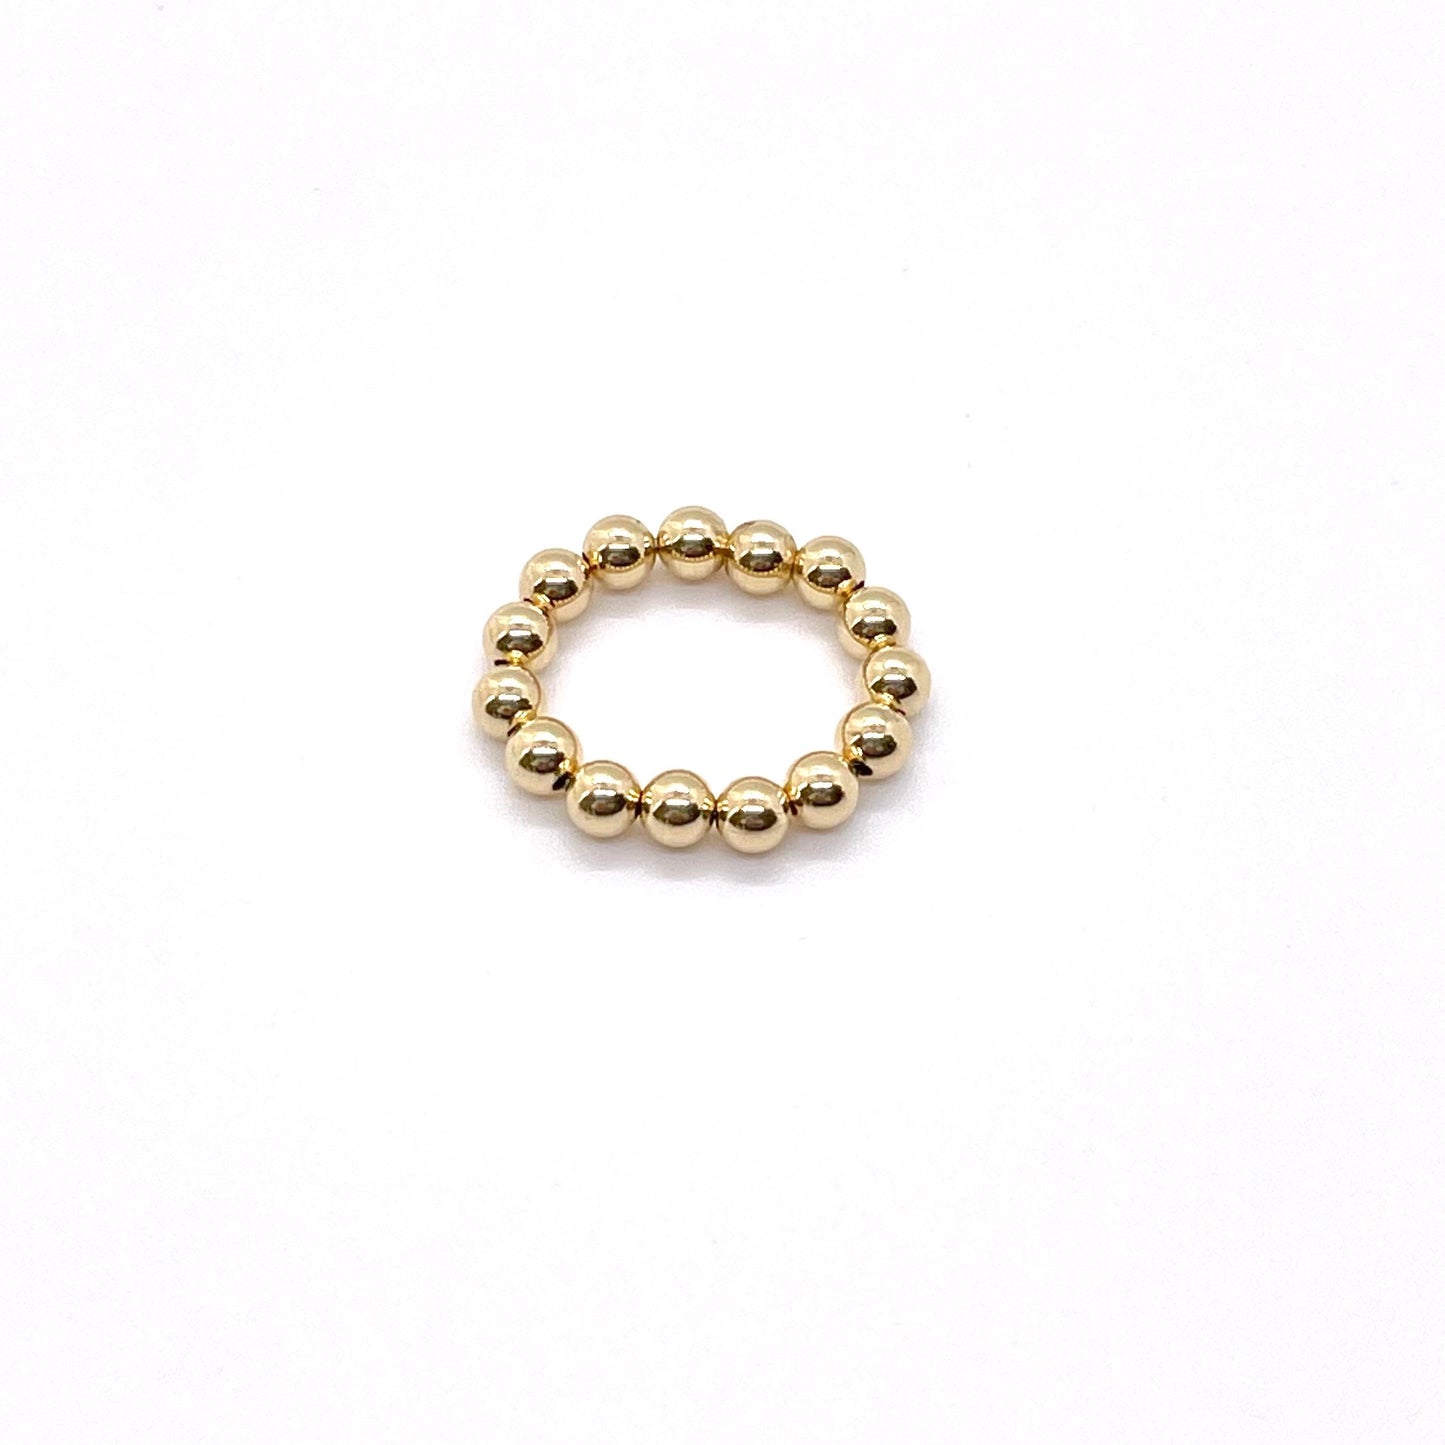 Gold ball ring with 4mm 14K gold filled waterproof beads on elastic stretch cord.